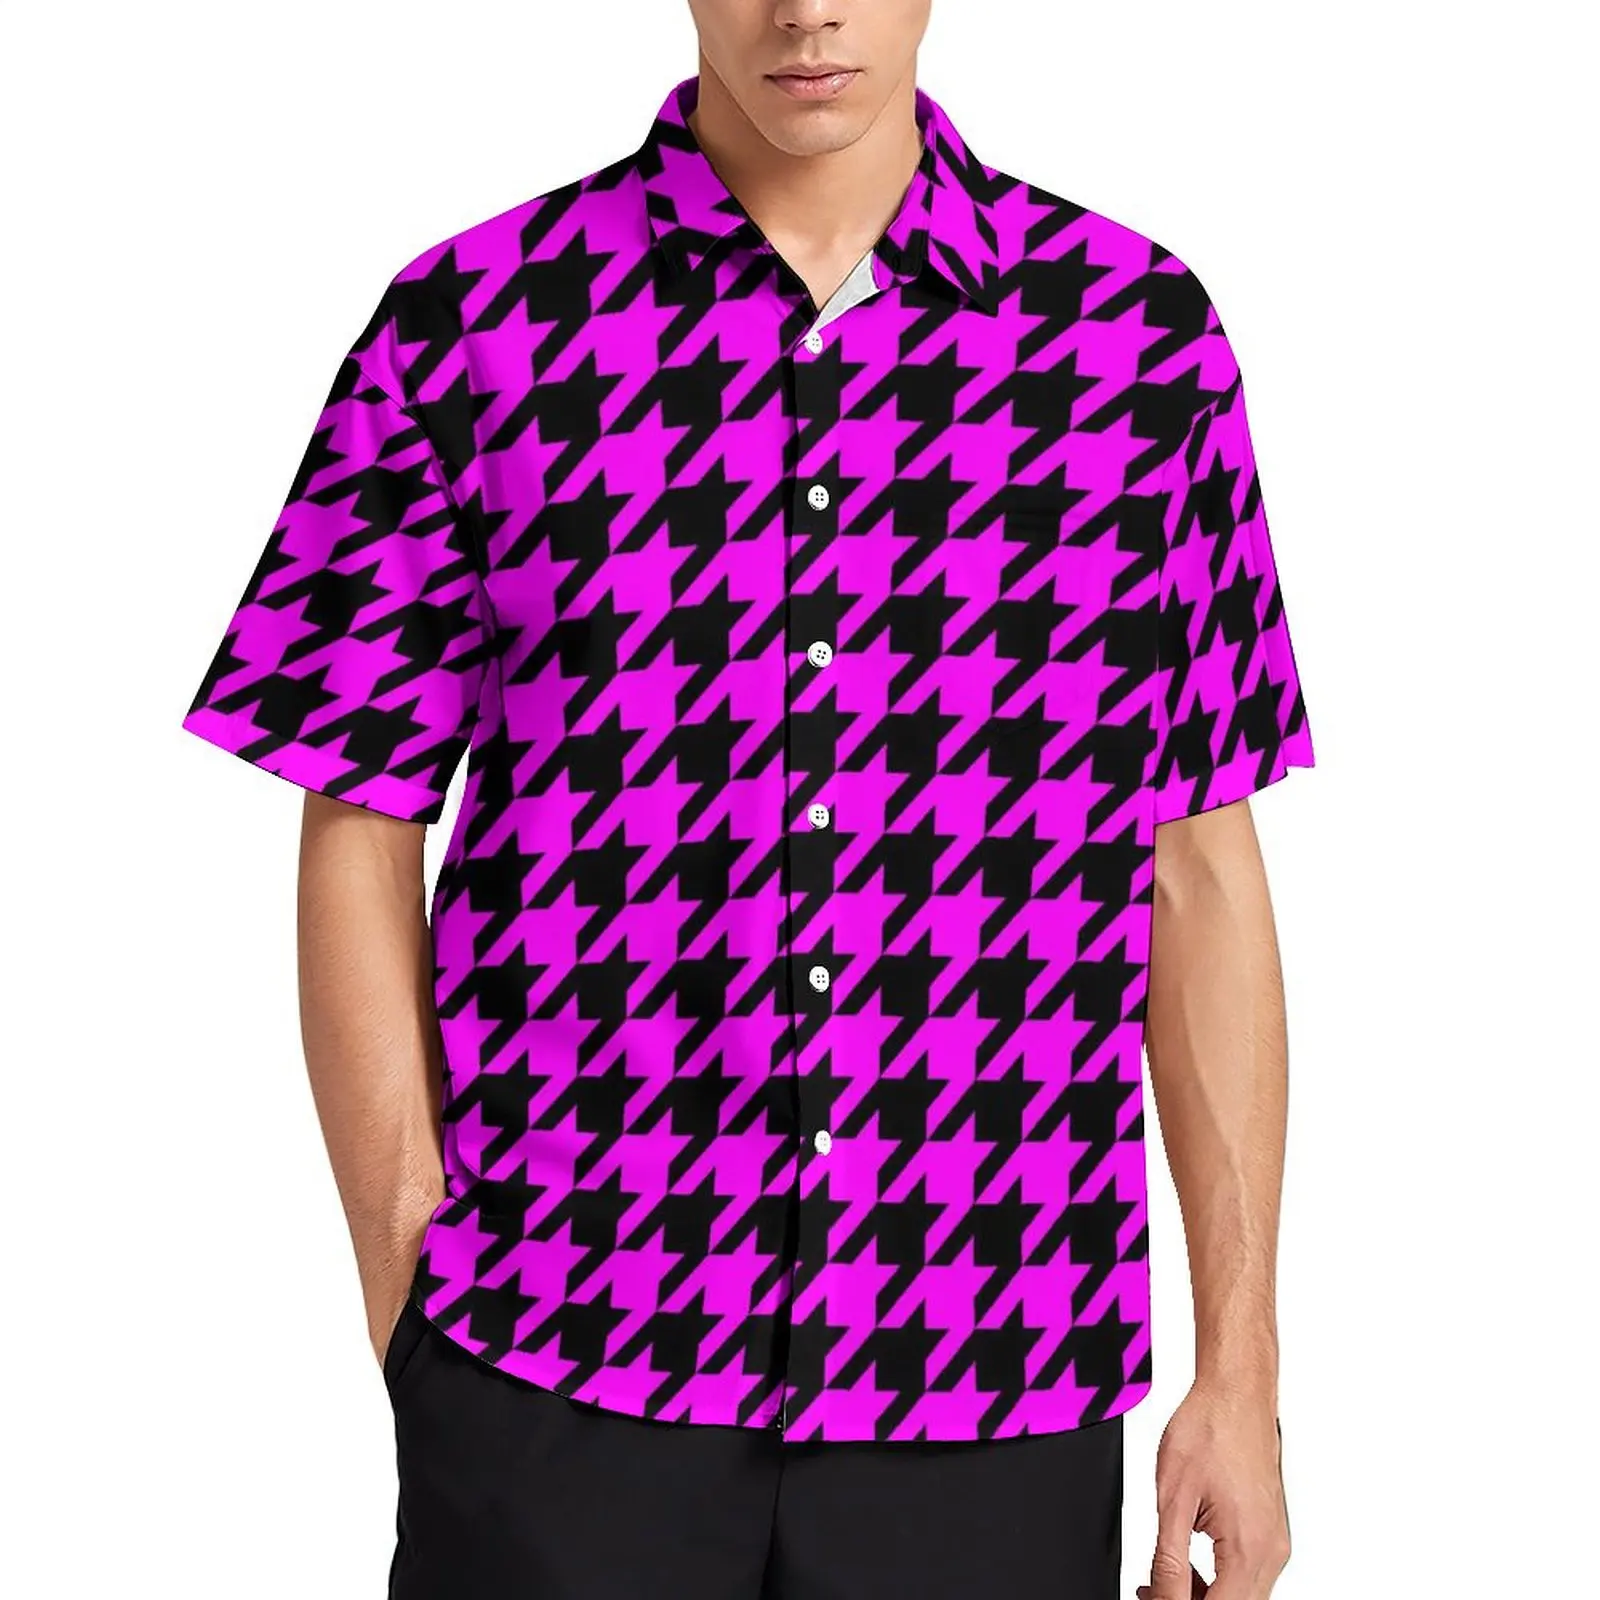 

Retro Houndstooth Summer Shirt For Men Vacation Purple And Black Casual Shirts Short Sleeve Comfortable Elegant Oversize Blouses